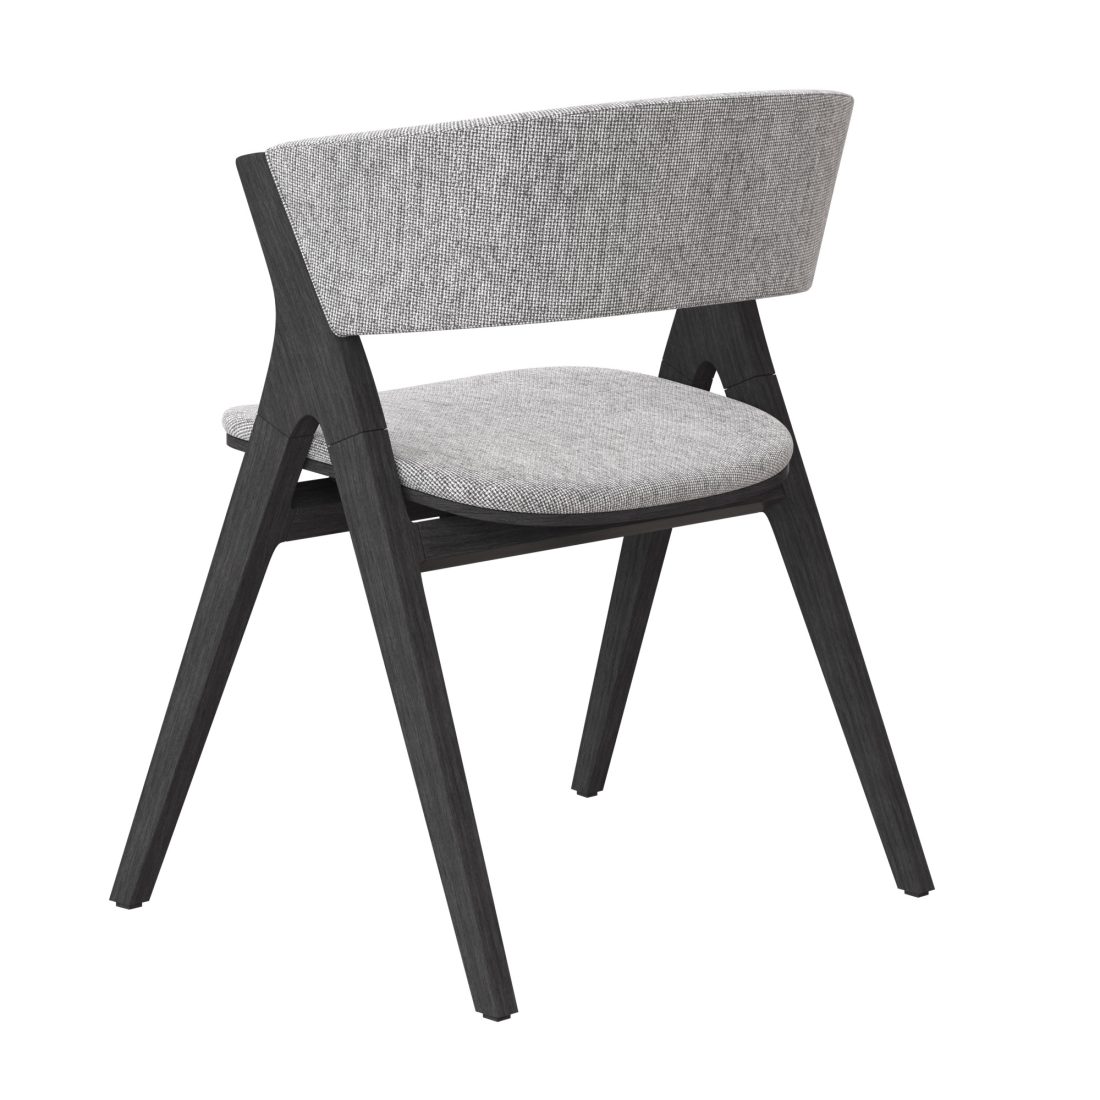 Remo Chair By Bonaldo - 3D Model for